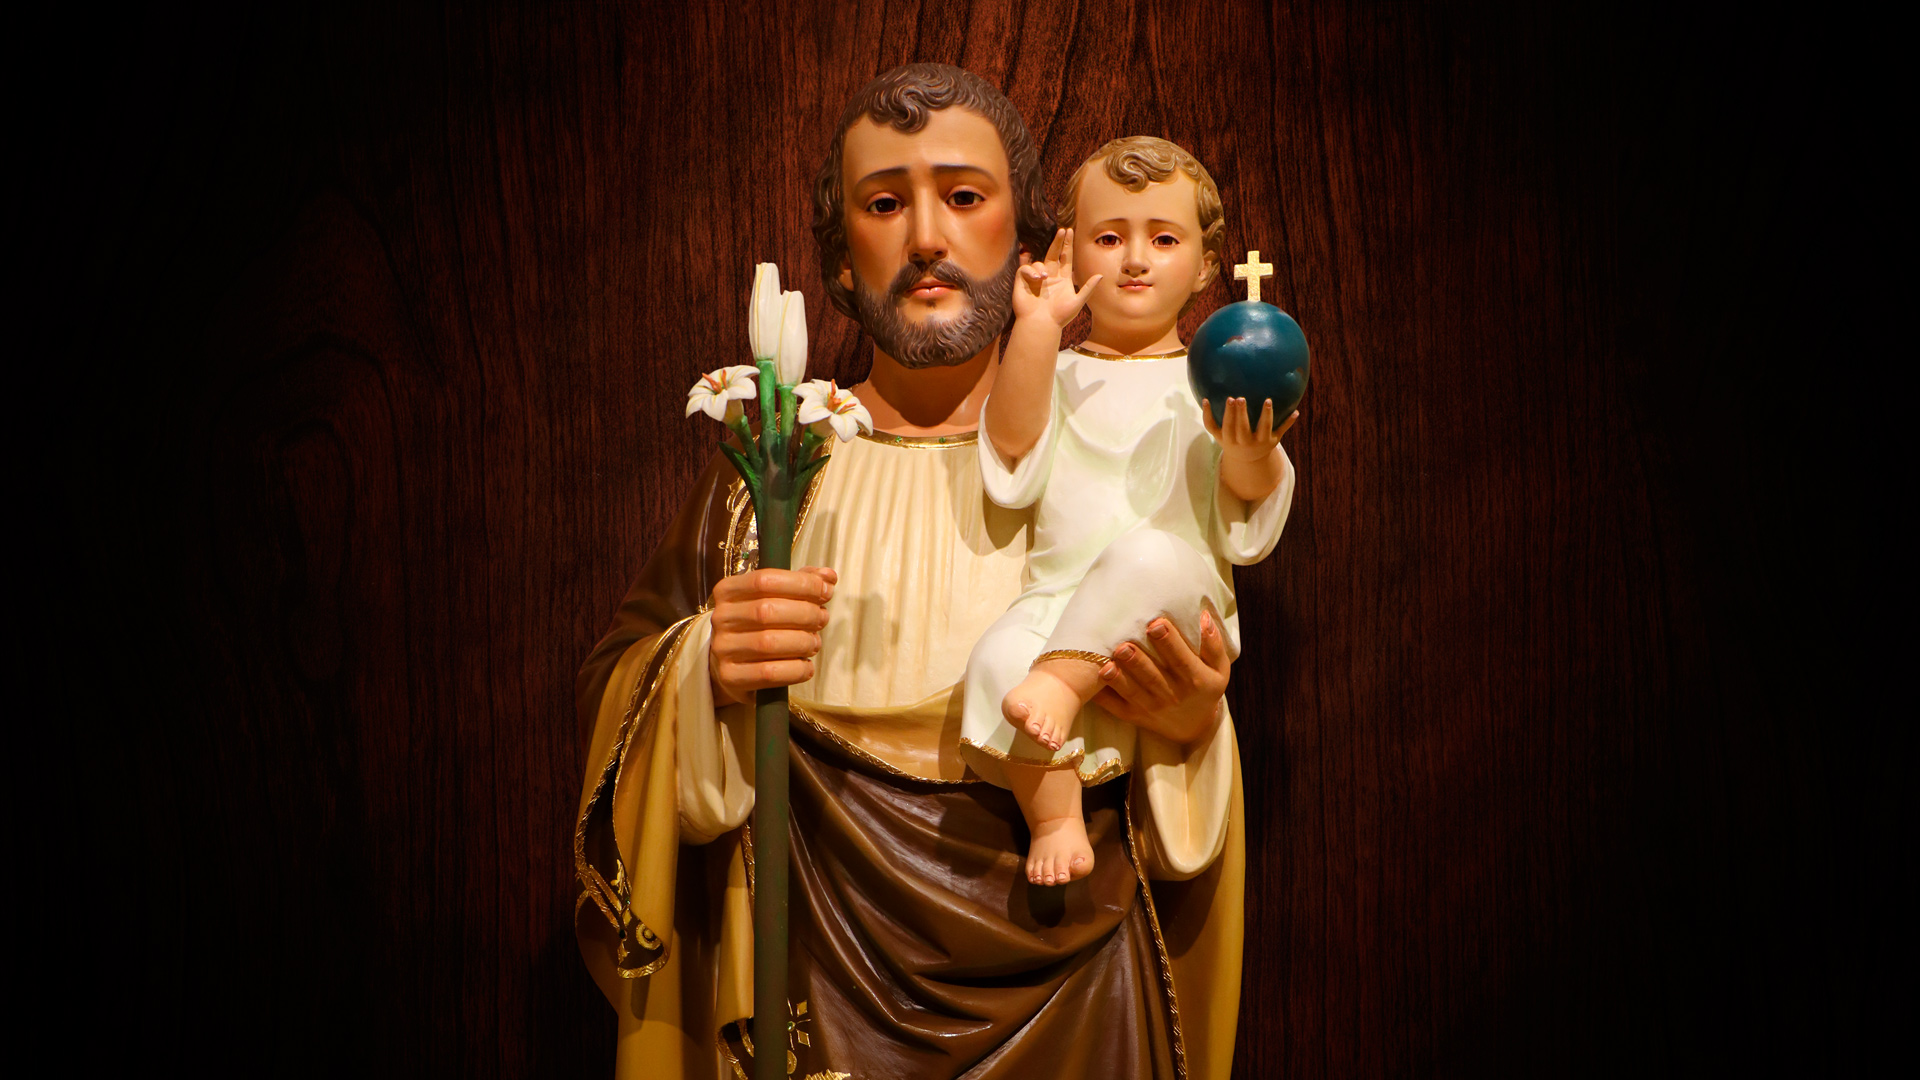 Hd Images Of Joseph With Jesus - God HD Wallpapers